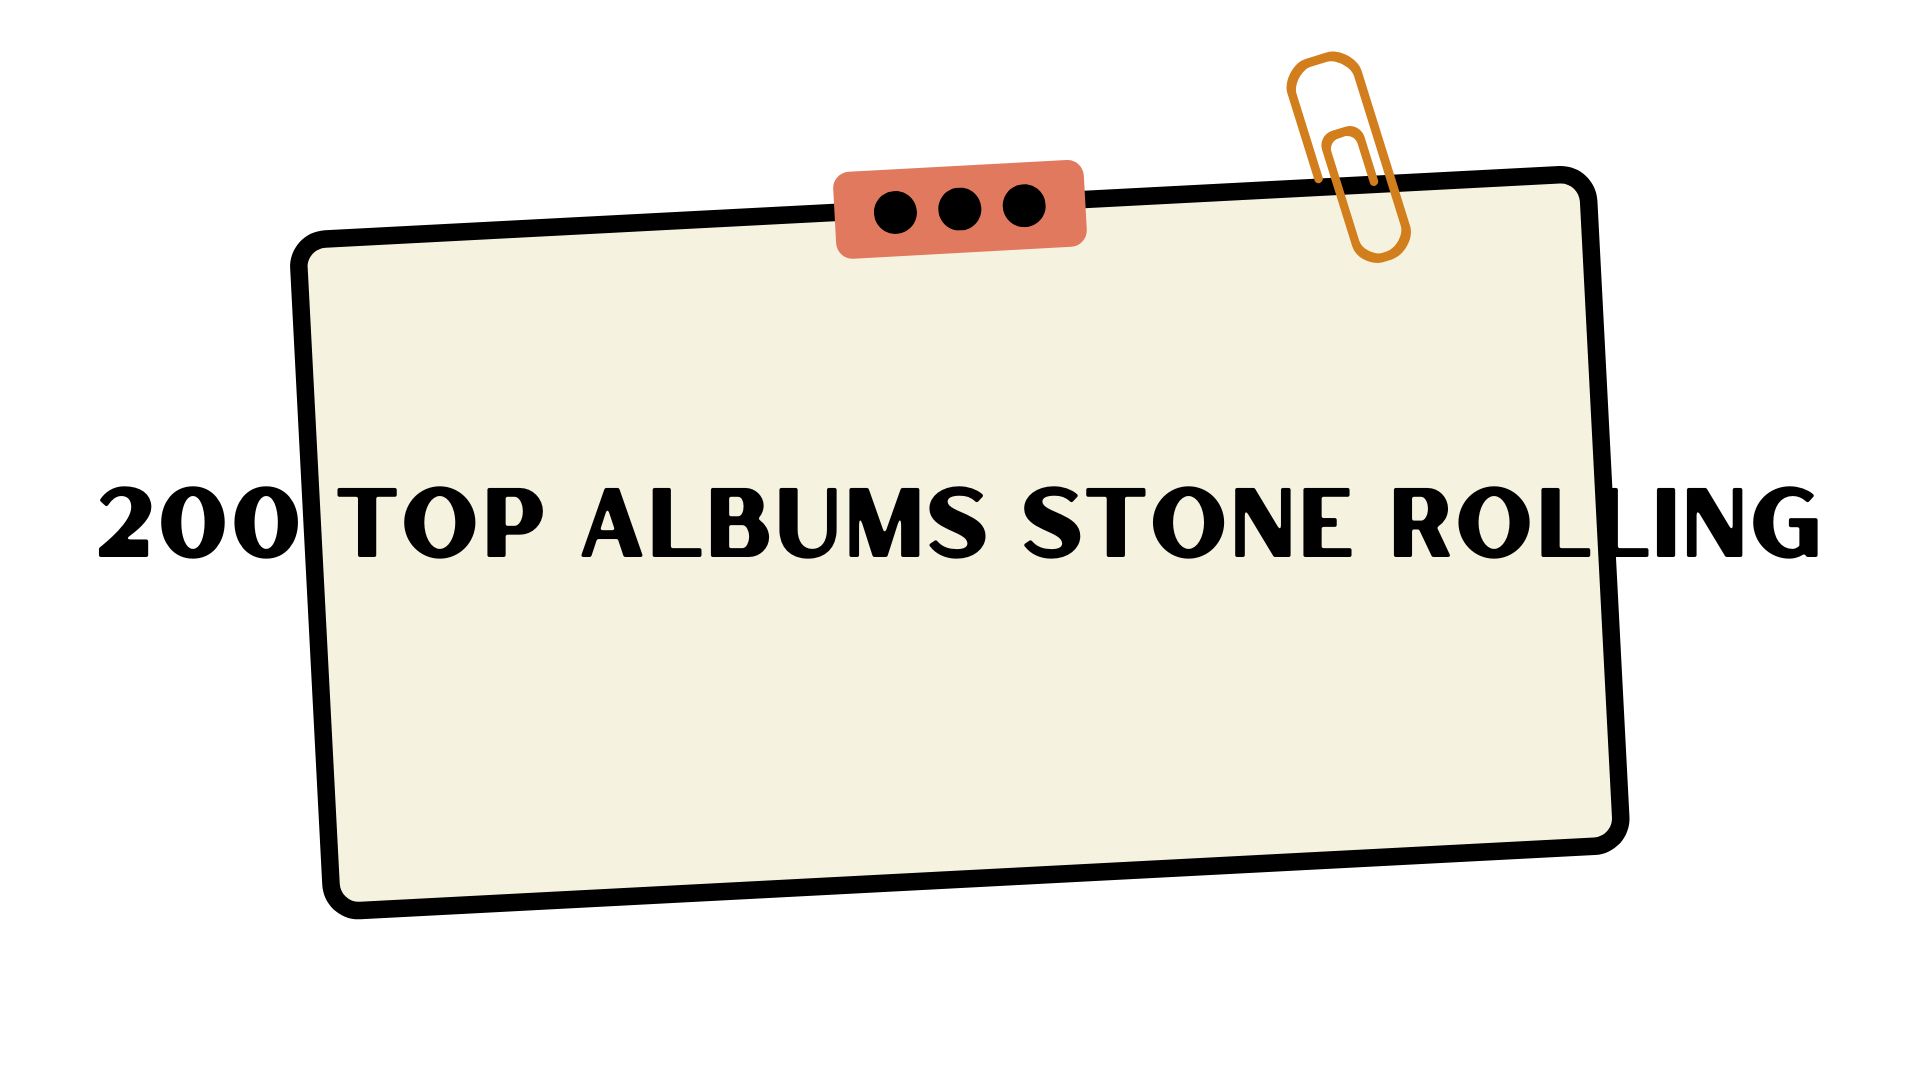 200 Top Albums Stone Rolling